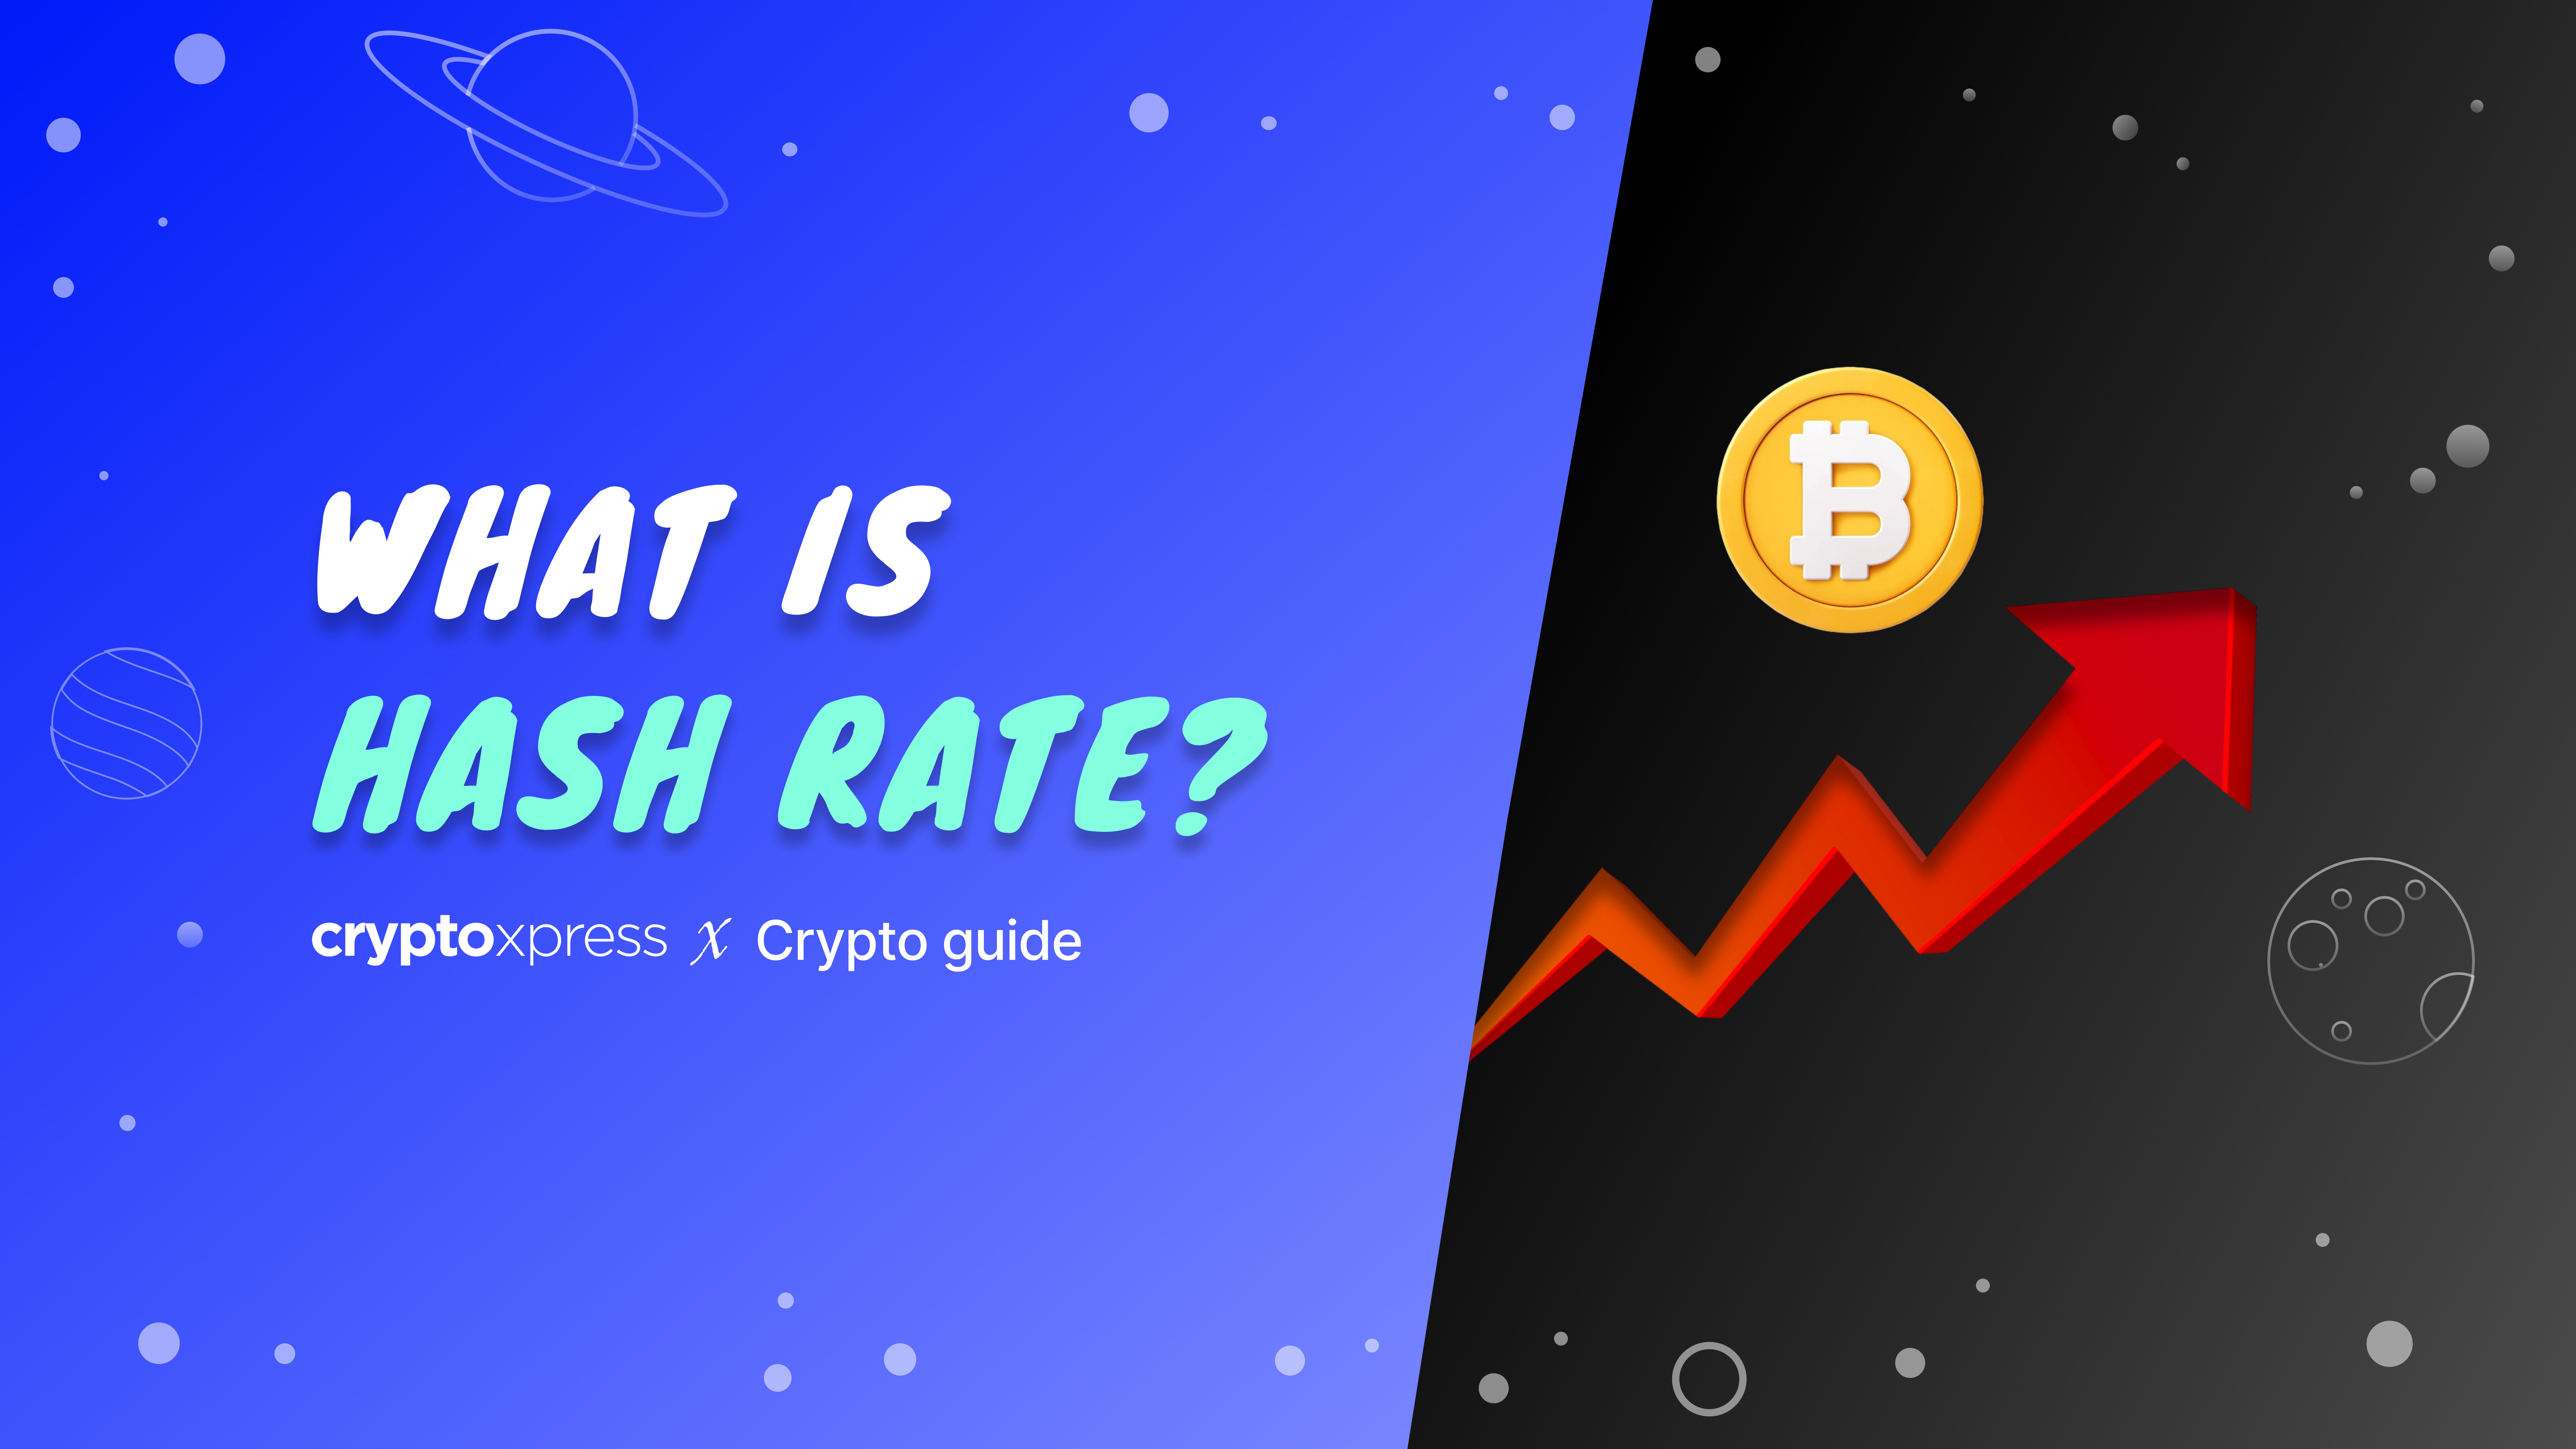 what is hashrate